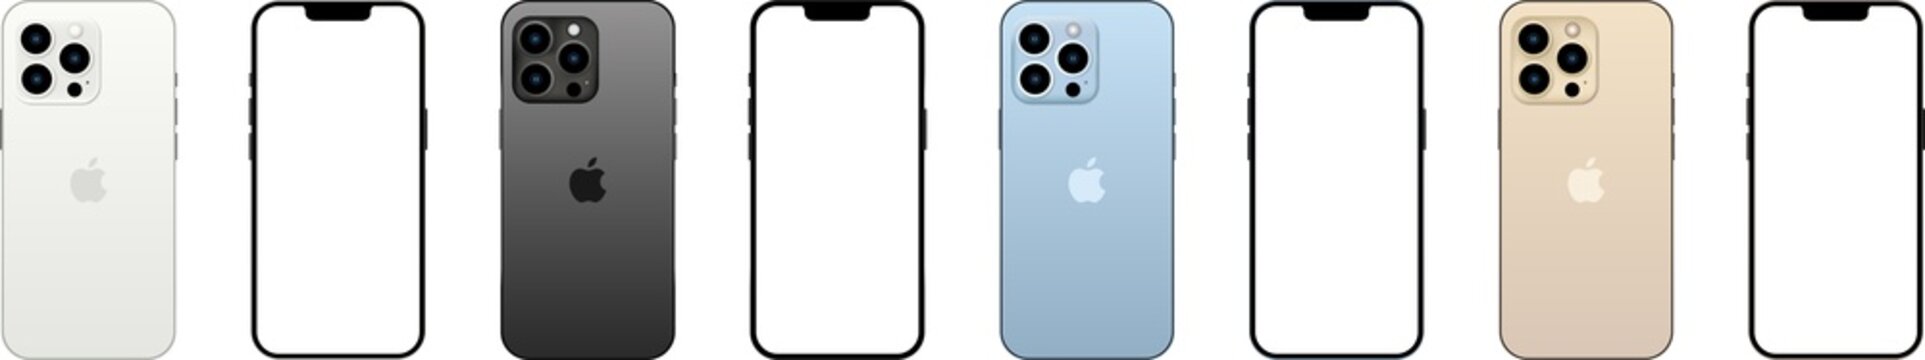 Realistic iphone 13 pro in four colors (Silver, Graphite, Sierra Blue and Gold) by Apple Inc. Mock-up screen iphone and back side iphone. PNG image